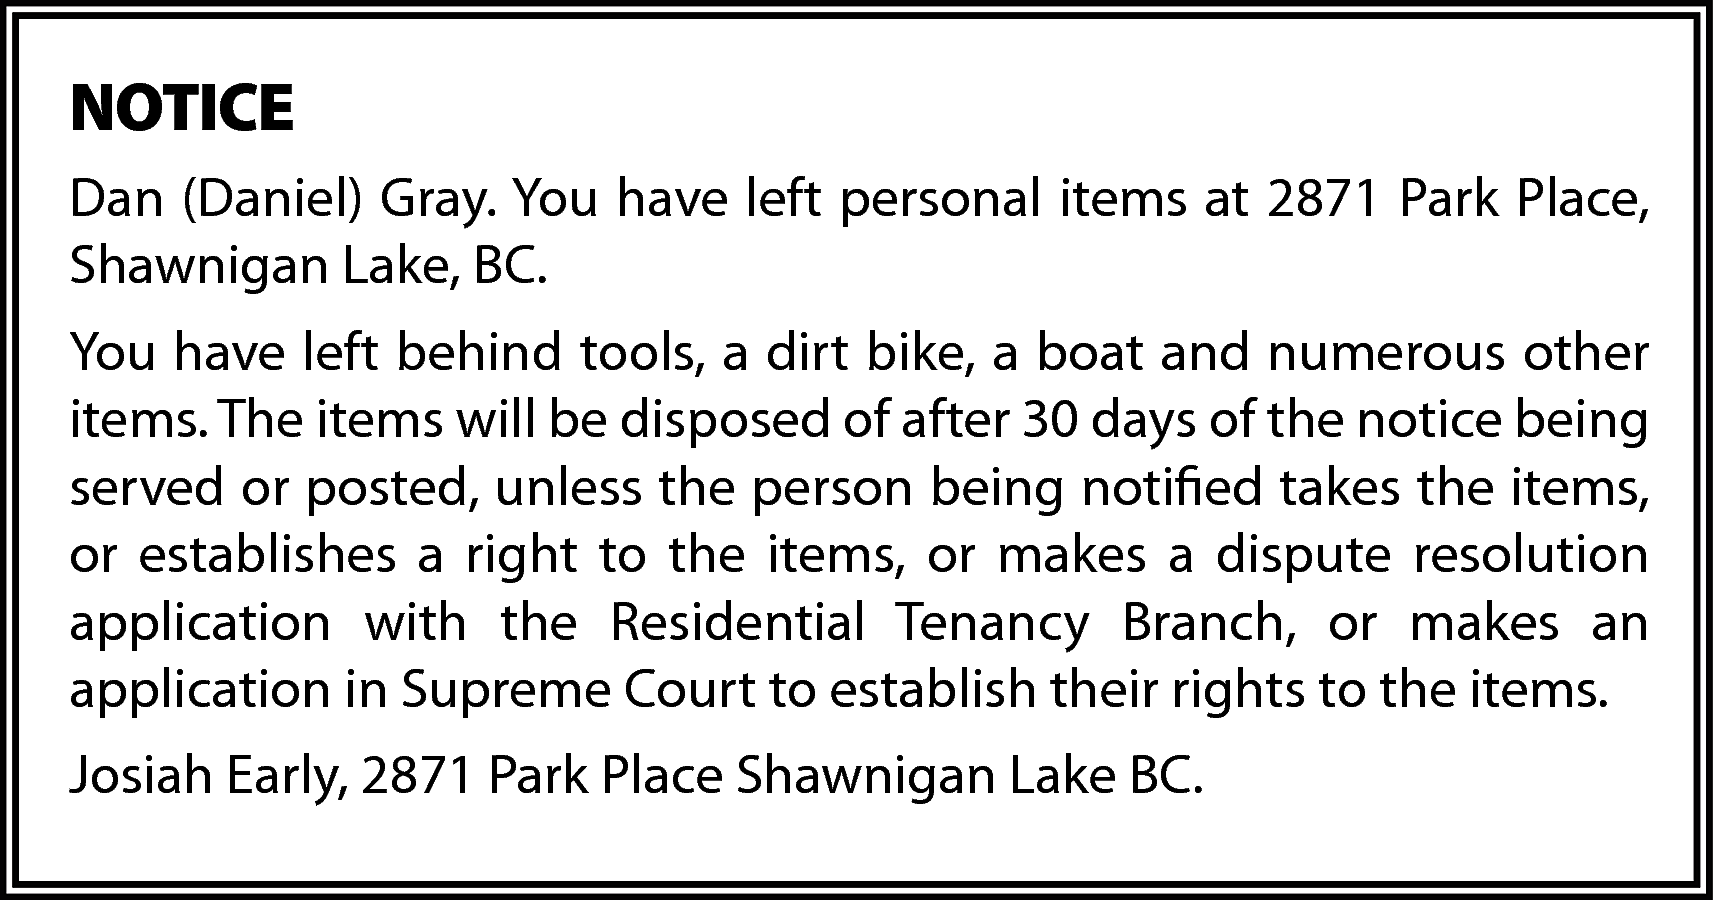 NOTICE <br>Dan (Daniel) Gray. You  NOTICE  Dan (Daniel) Gray. You have left personal items at 2871 Park Place,  Shawnigan Lake, BC.  You have left behind tools, a dirt bike, a boat and numerous other  items. The items will be disposed of after 30 days of the notice being  served or posted, unless the person being notified takes the items,  or establishes a right to the items, or makes a dispute resolution  application with the Residential Tenancy Branch, or makes an  application in Supreme Court to establish their rights to the items.  Josiah Early, 2871 Park Place Shawnigan Lake BC.    